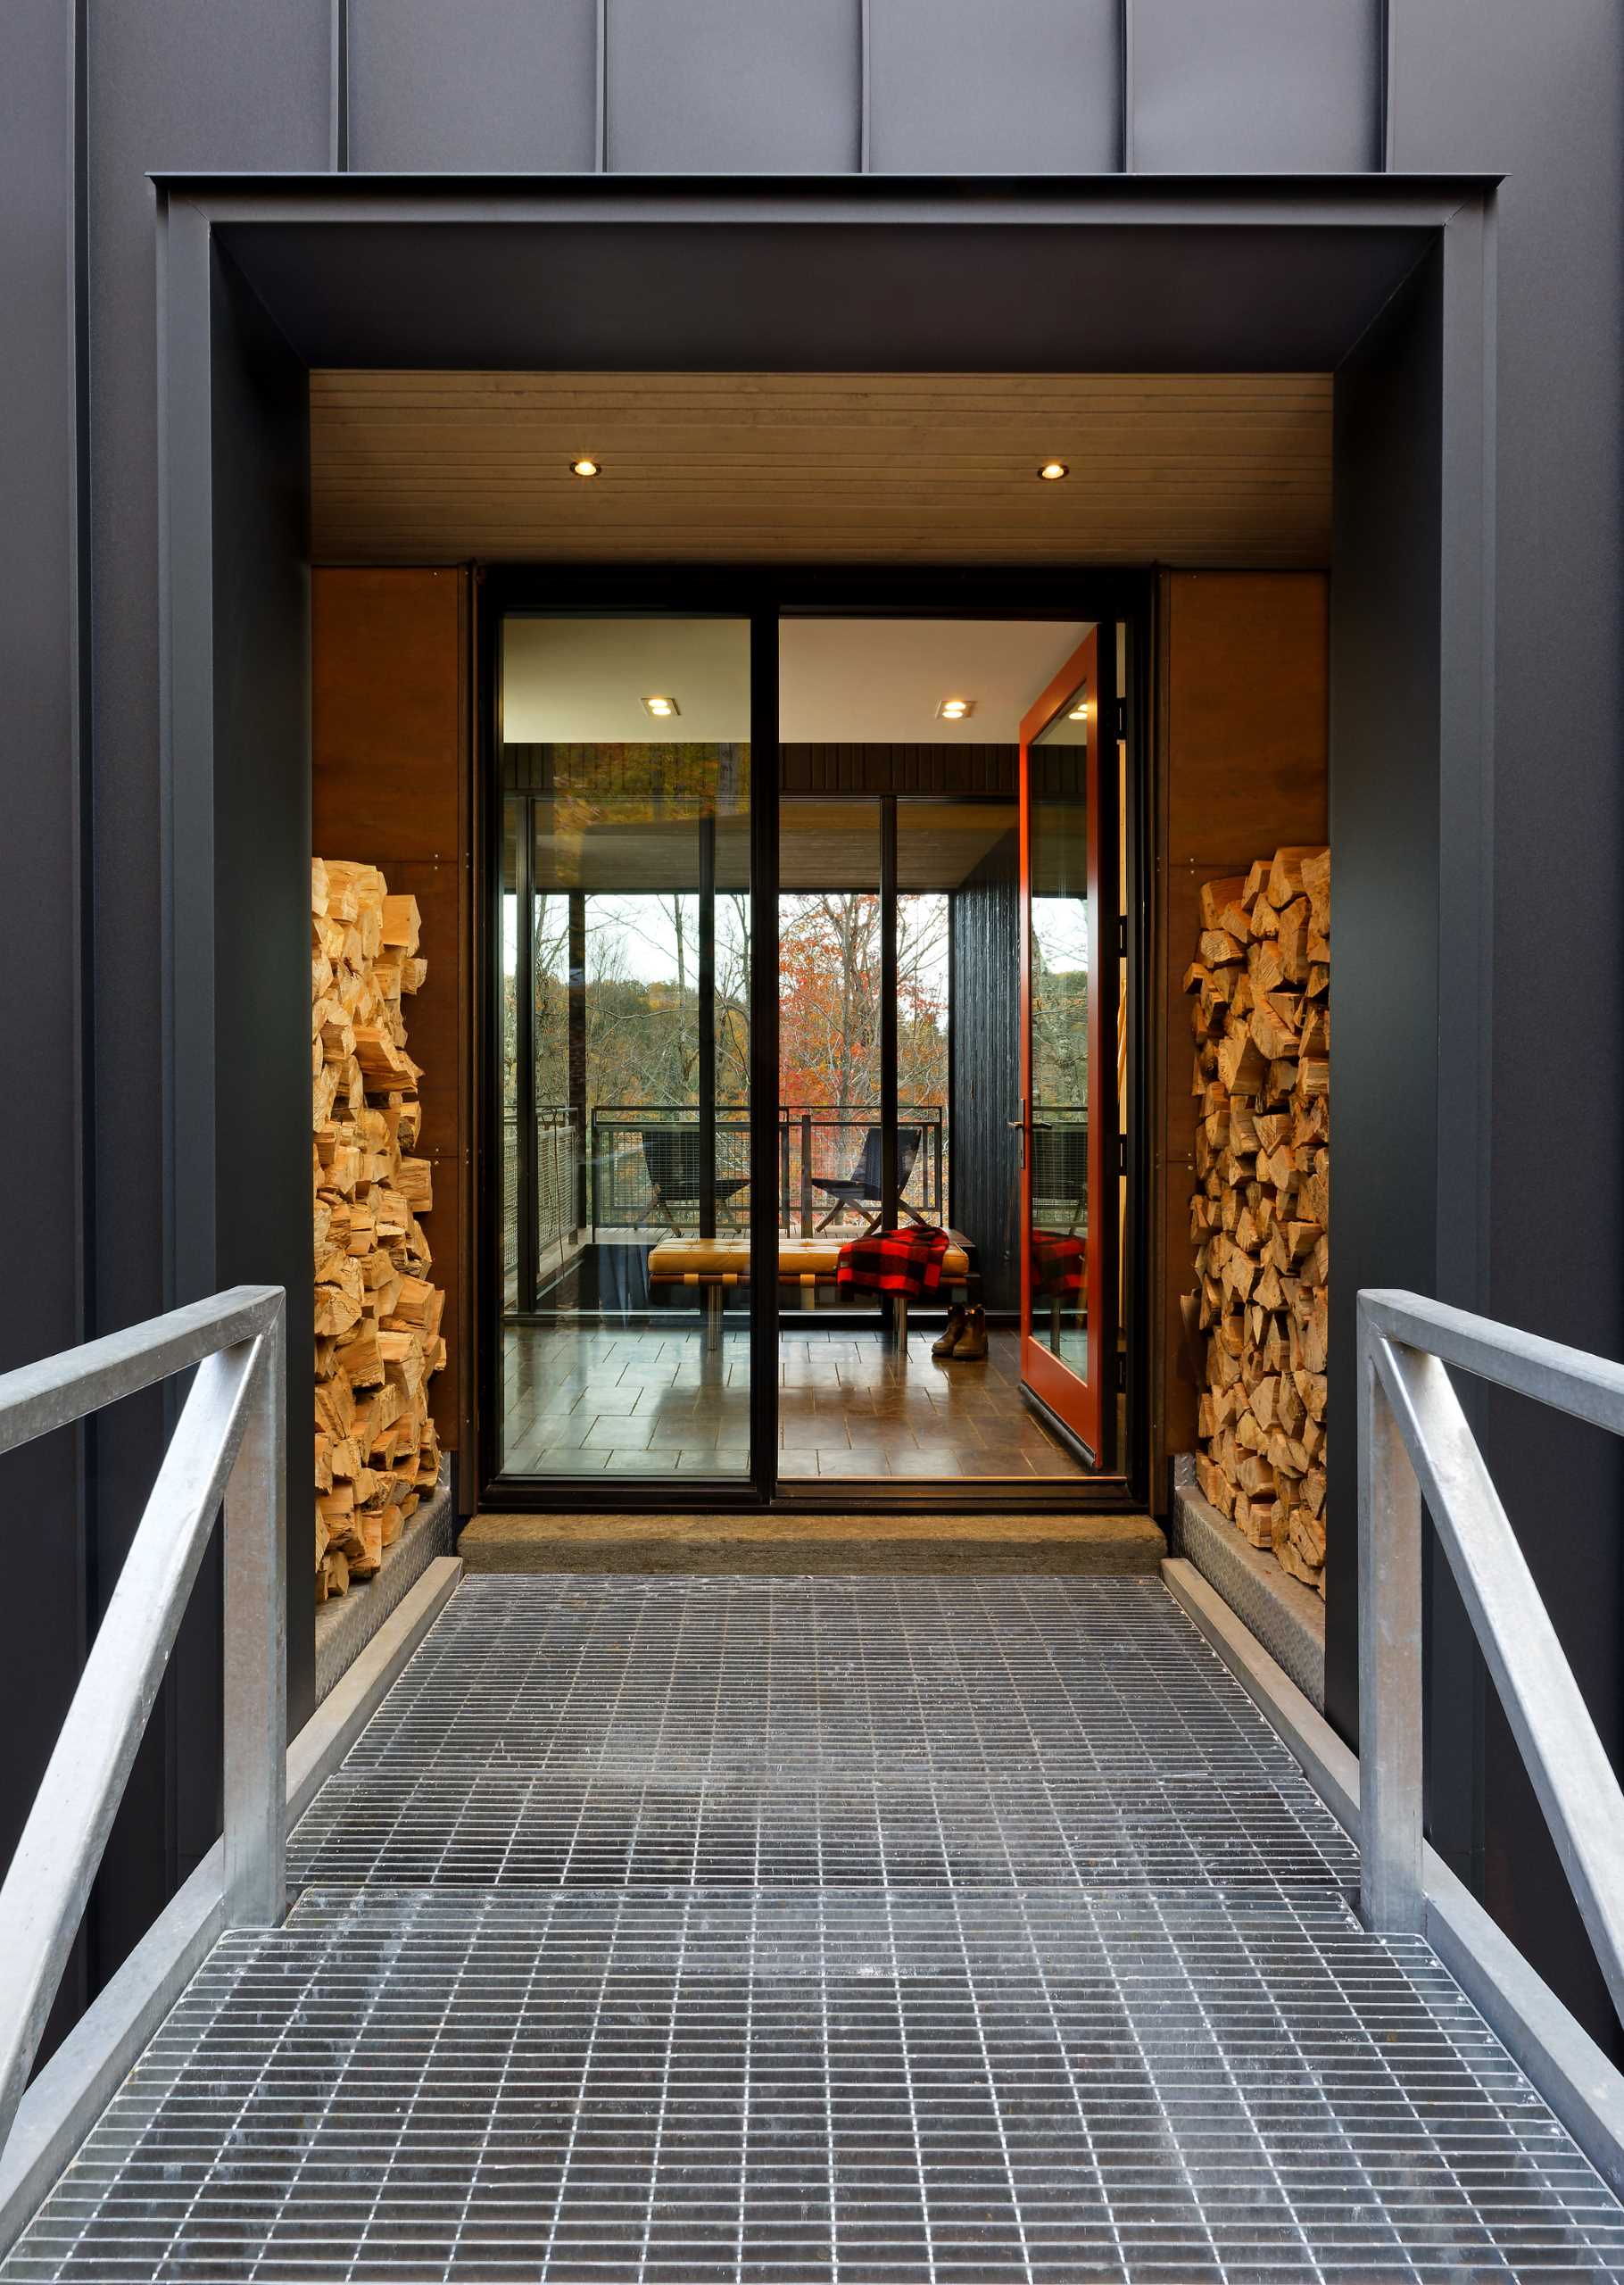 A galvanized steel bridge, which connects the granite slab steps of the hillside, brings you across to the generous glazed front doorway, while the dark exterior material palette allows the home to contrast the lively colors of the forest.